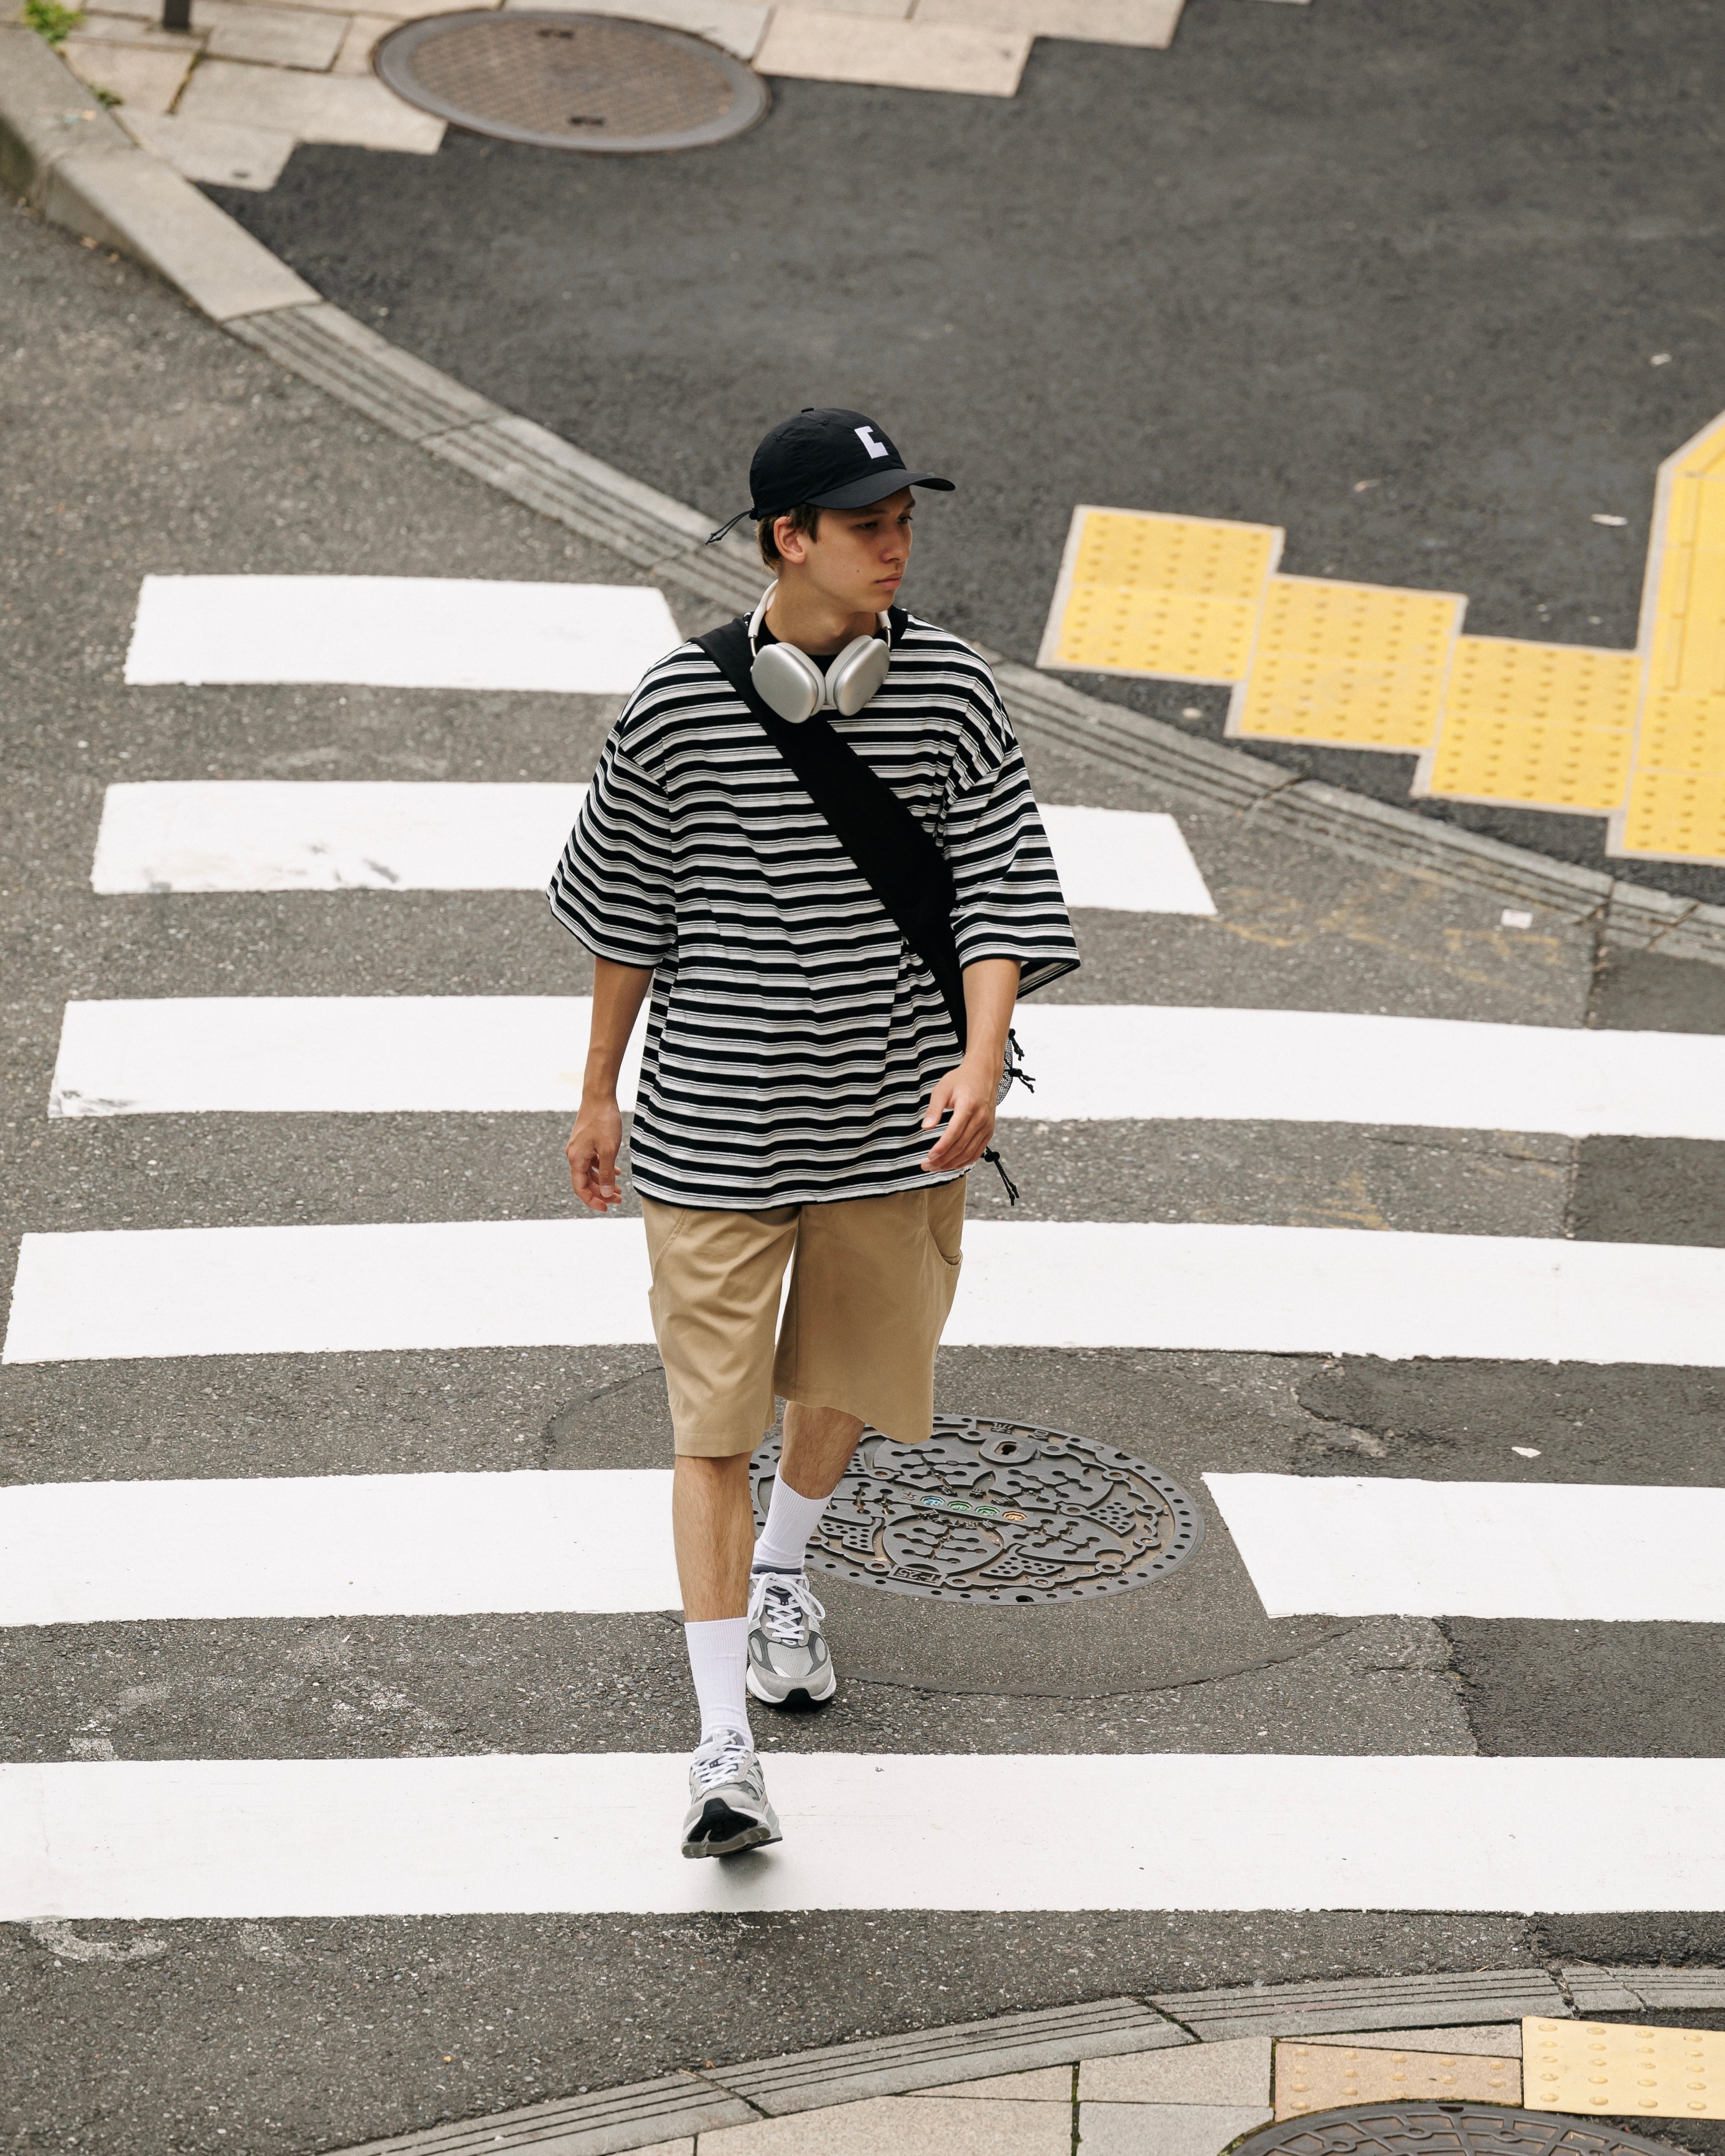 【7.3 WED 20:00- IN STOCK】MULTI STRIPED MASSIVE T-SHIRT WITH DRAWSTRINGS.